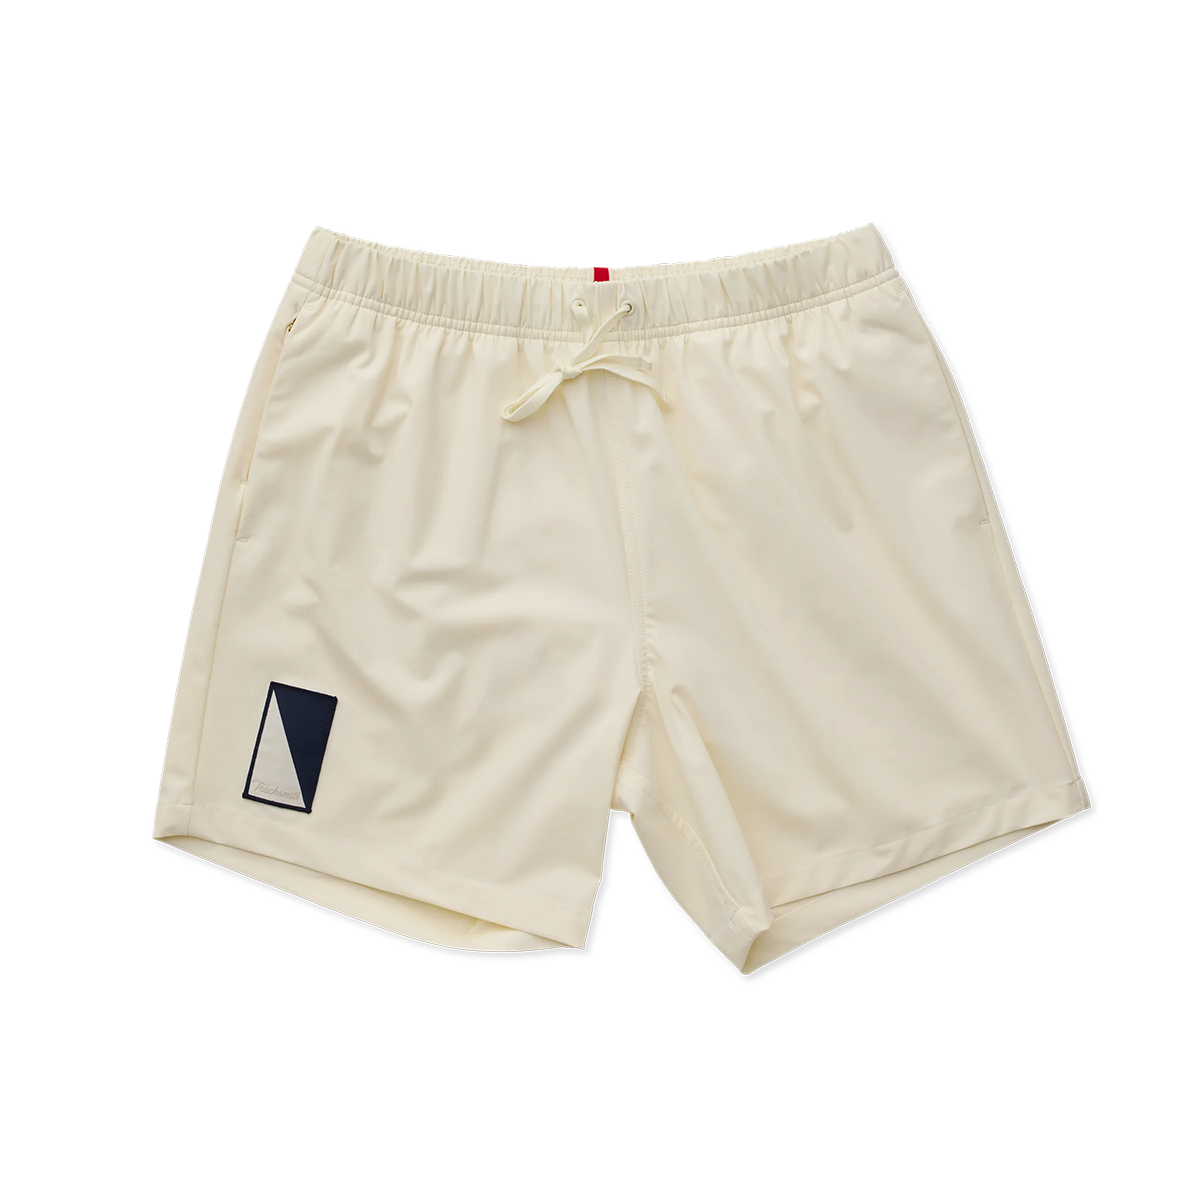 Tracksmith Run Cannonball Run Shorts, , large image number null